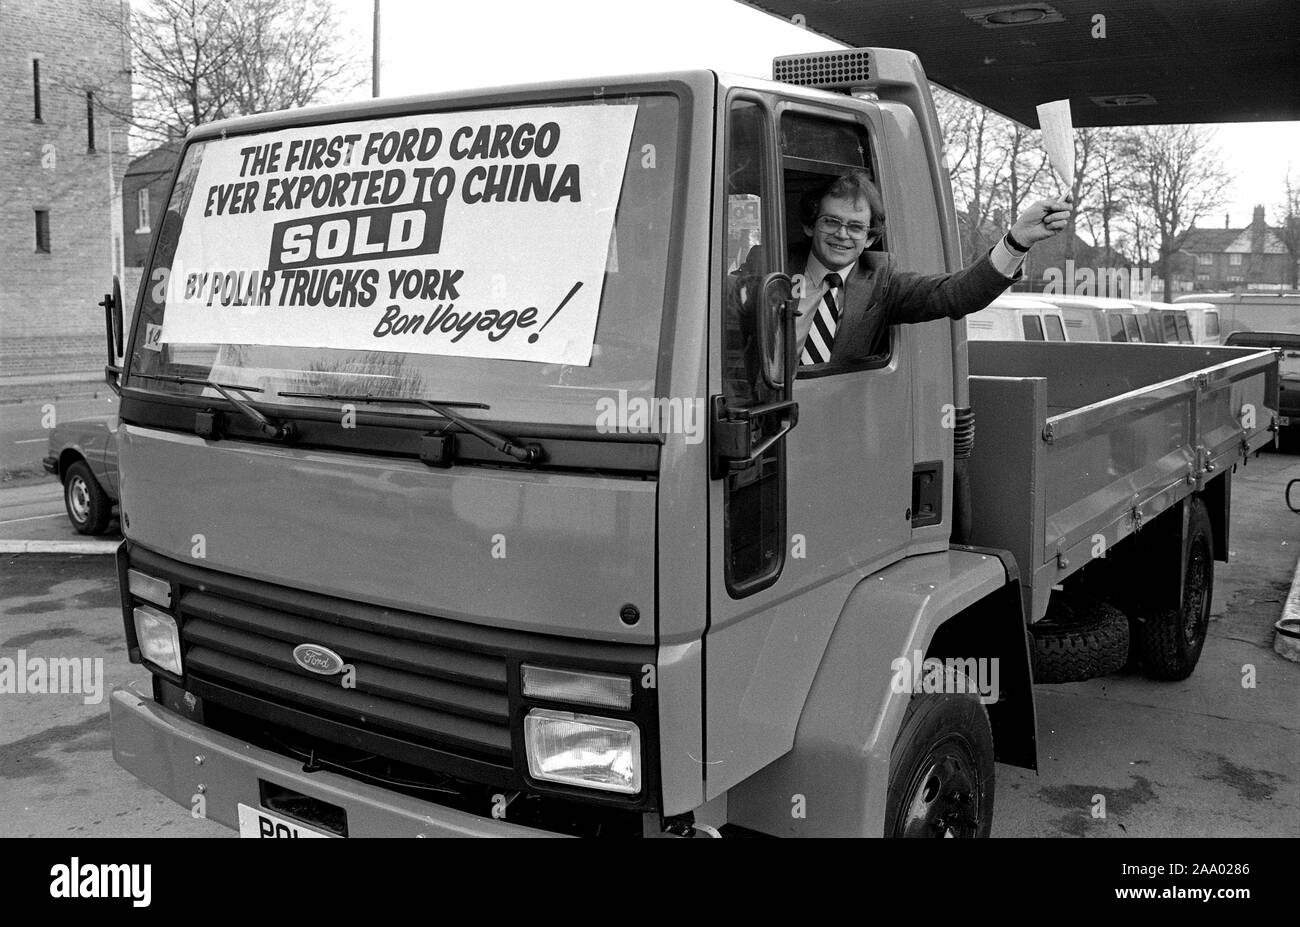 Ford Cargo truck being exported to China from Britain in 1985 Stock Photo -  Alamy